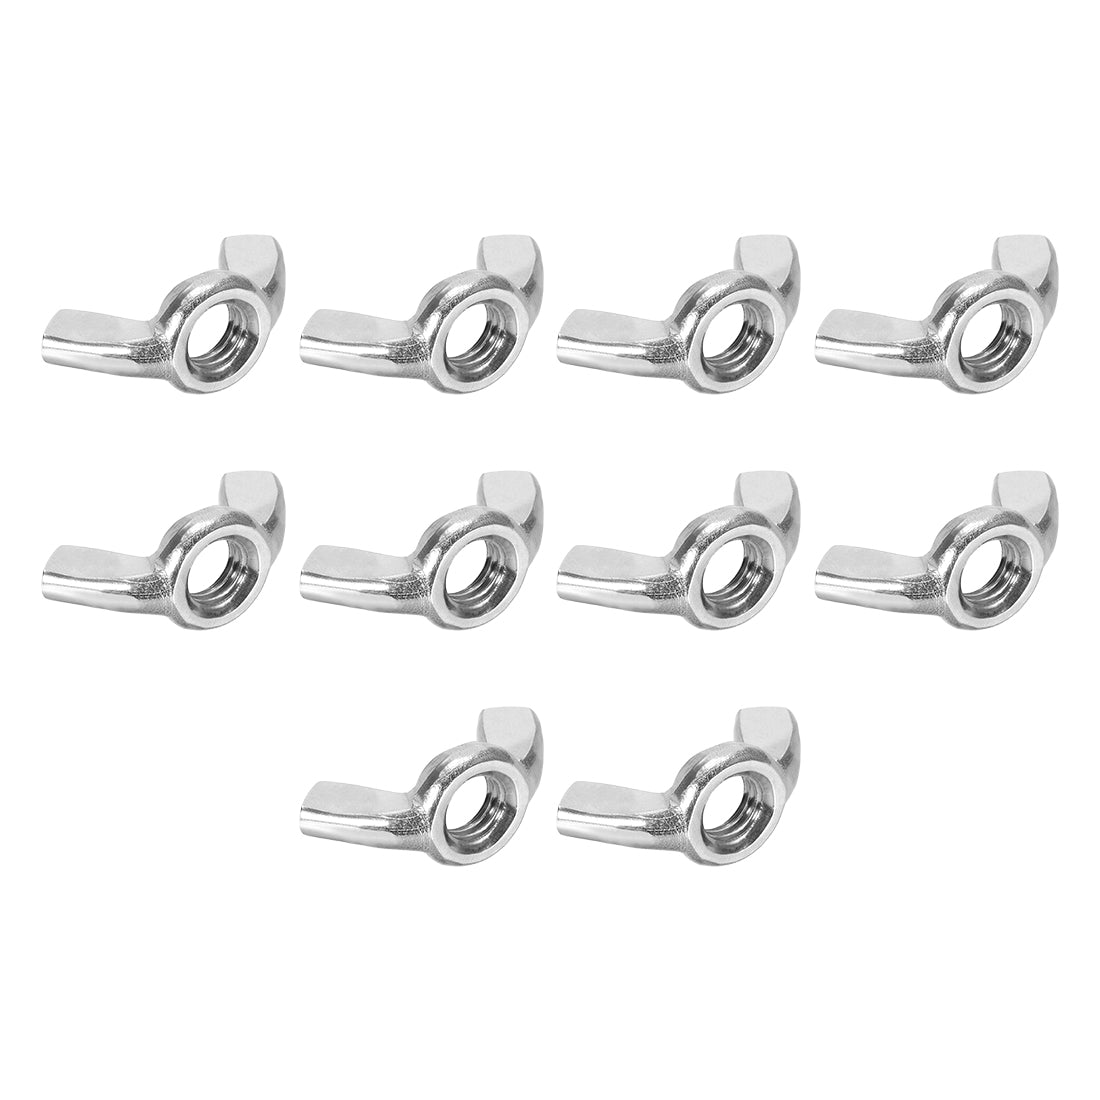 uxcell Uxcell Imperial Wing Nuts, Carbon Steel Zinc Plated Hand Twist Tighten Ear Butterfly Nut, 10 Pcs